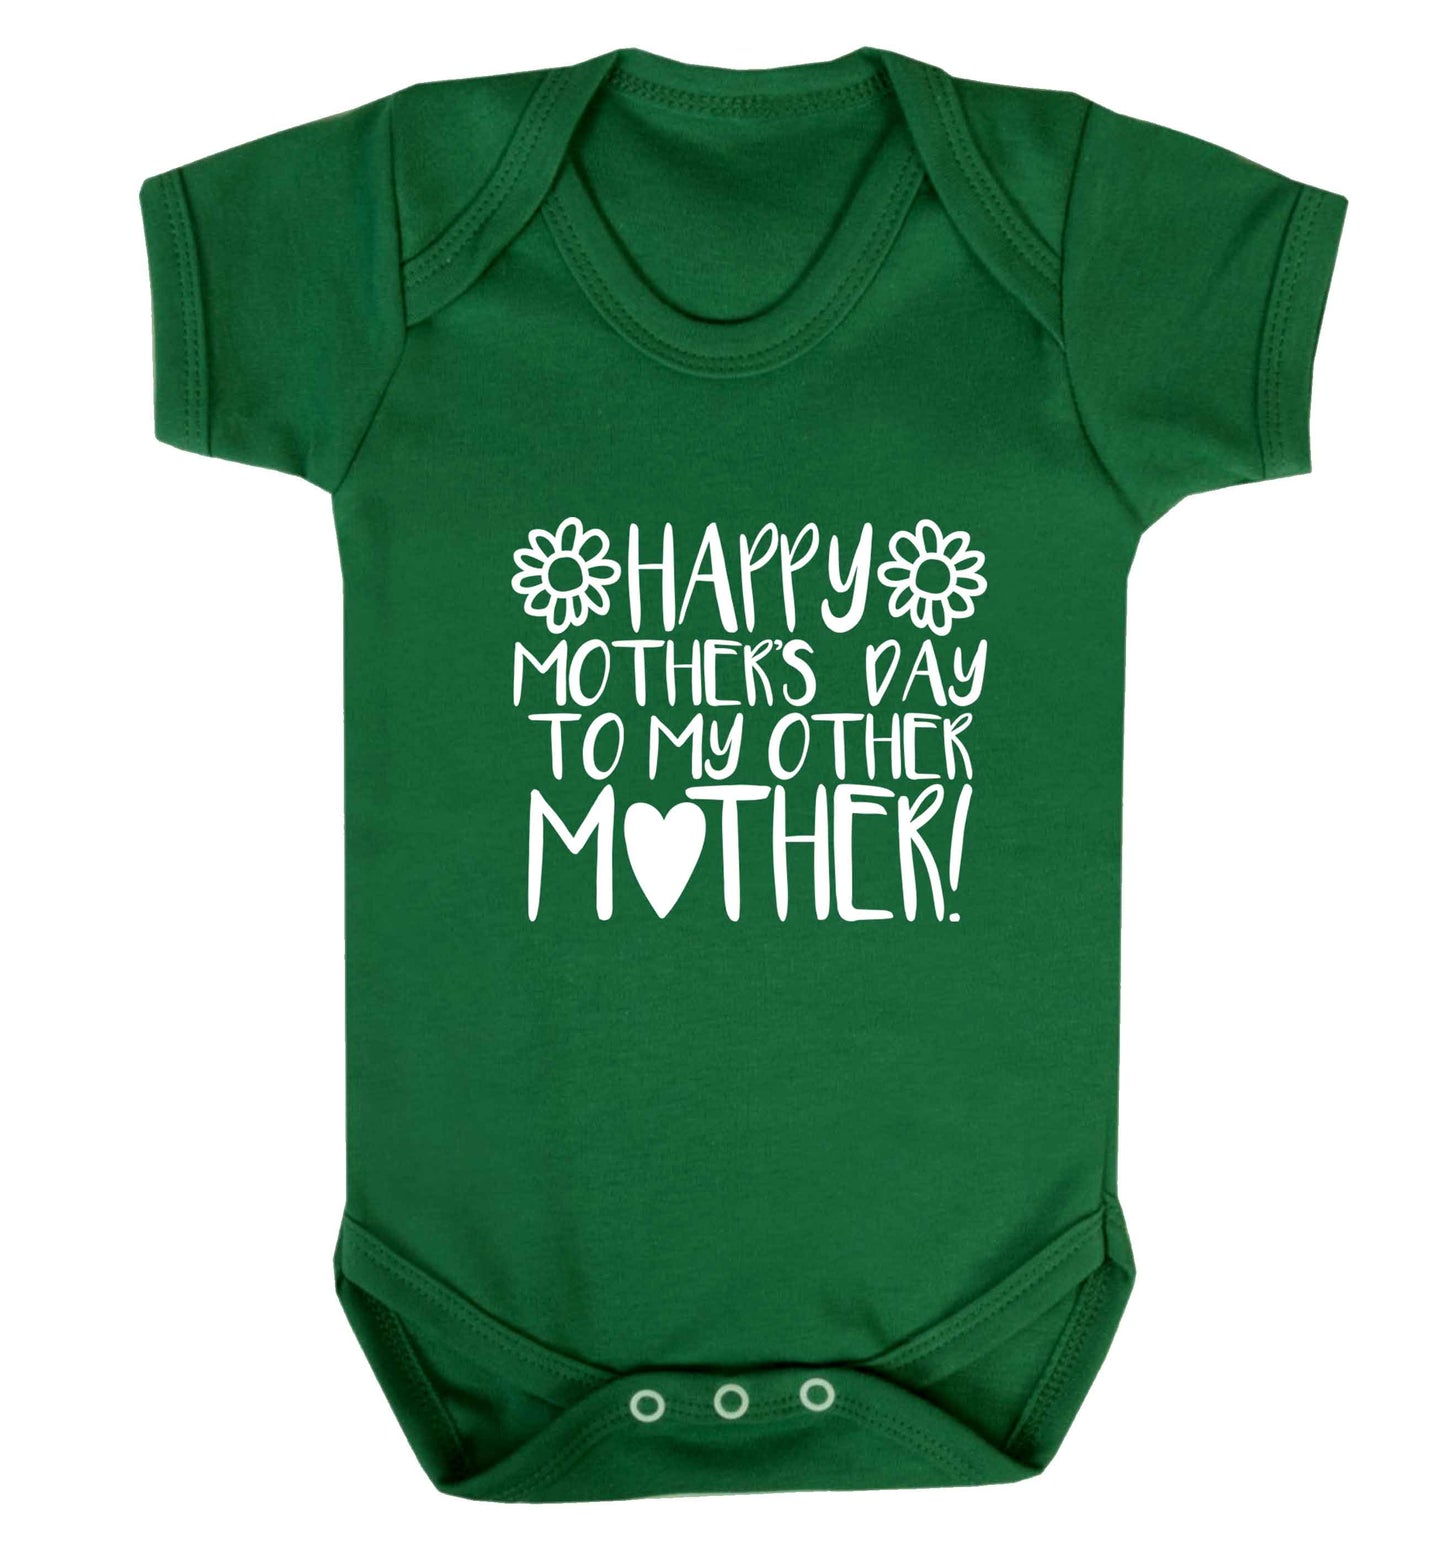 Happy mother's day to my other mother baby vest green 18-24 months